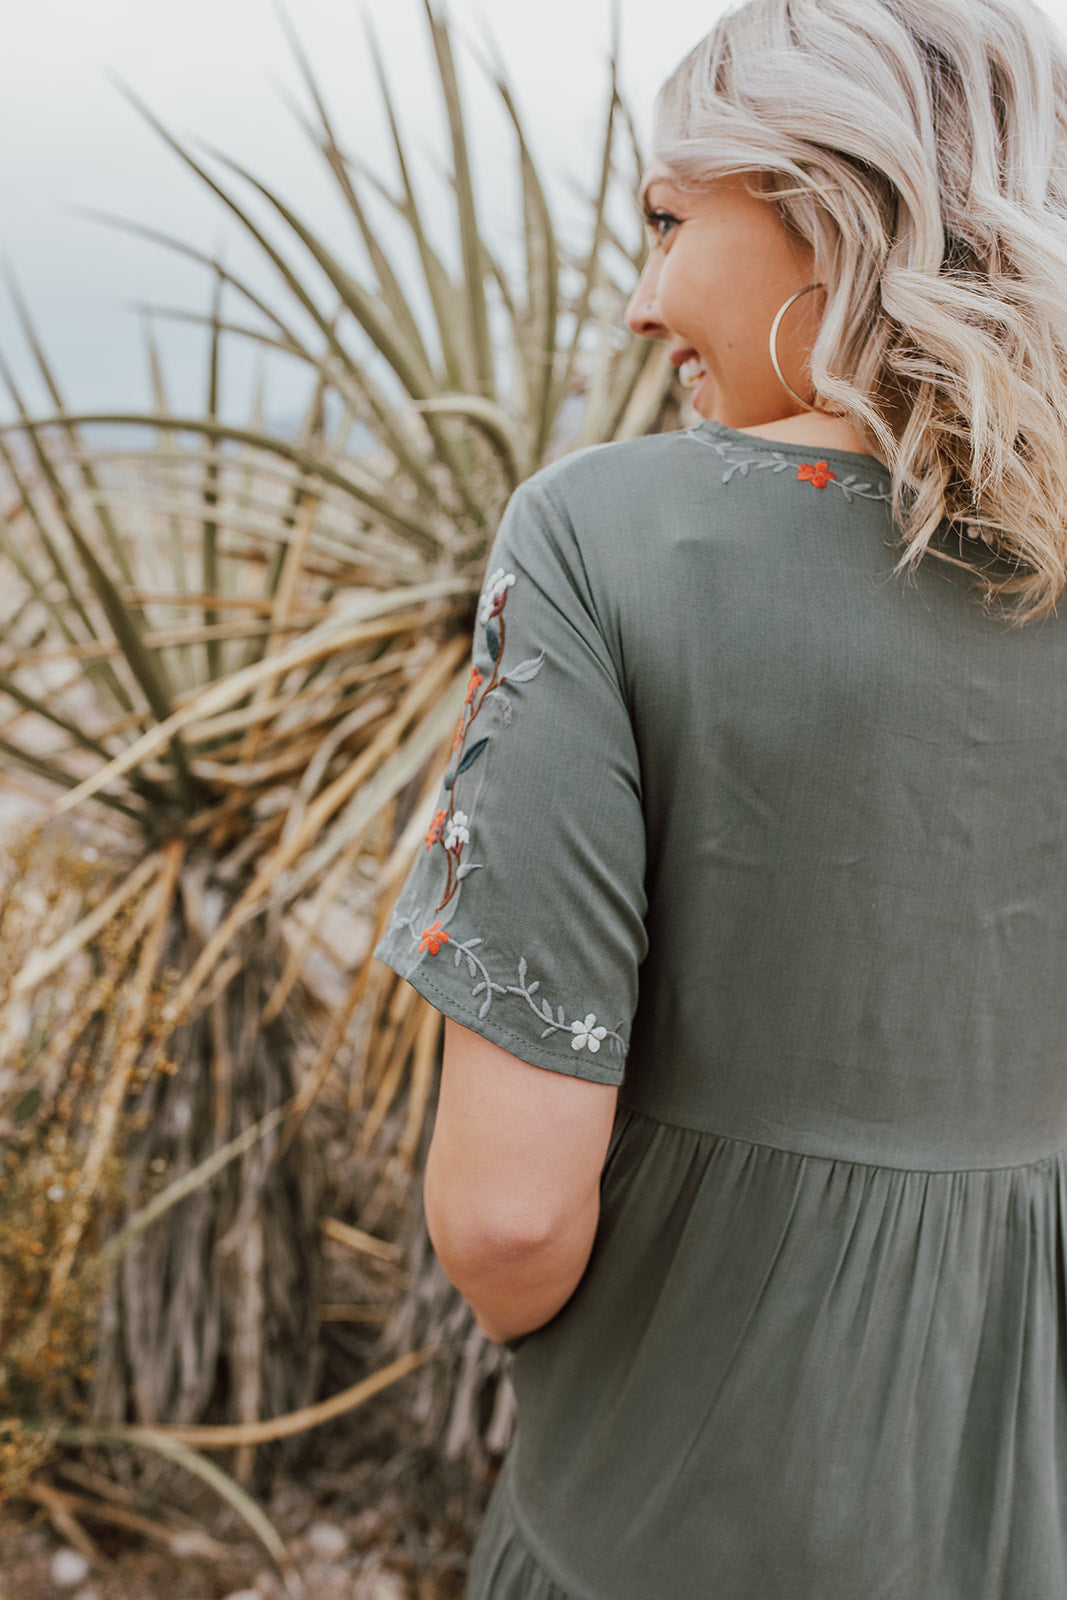 THE BEYOND WORDS EMBROIDERED MIDI DRESS IN JADE